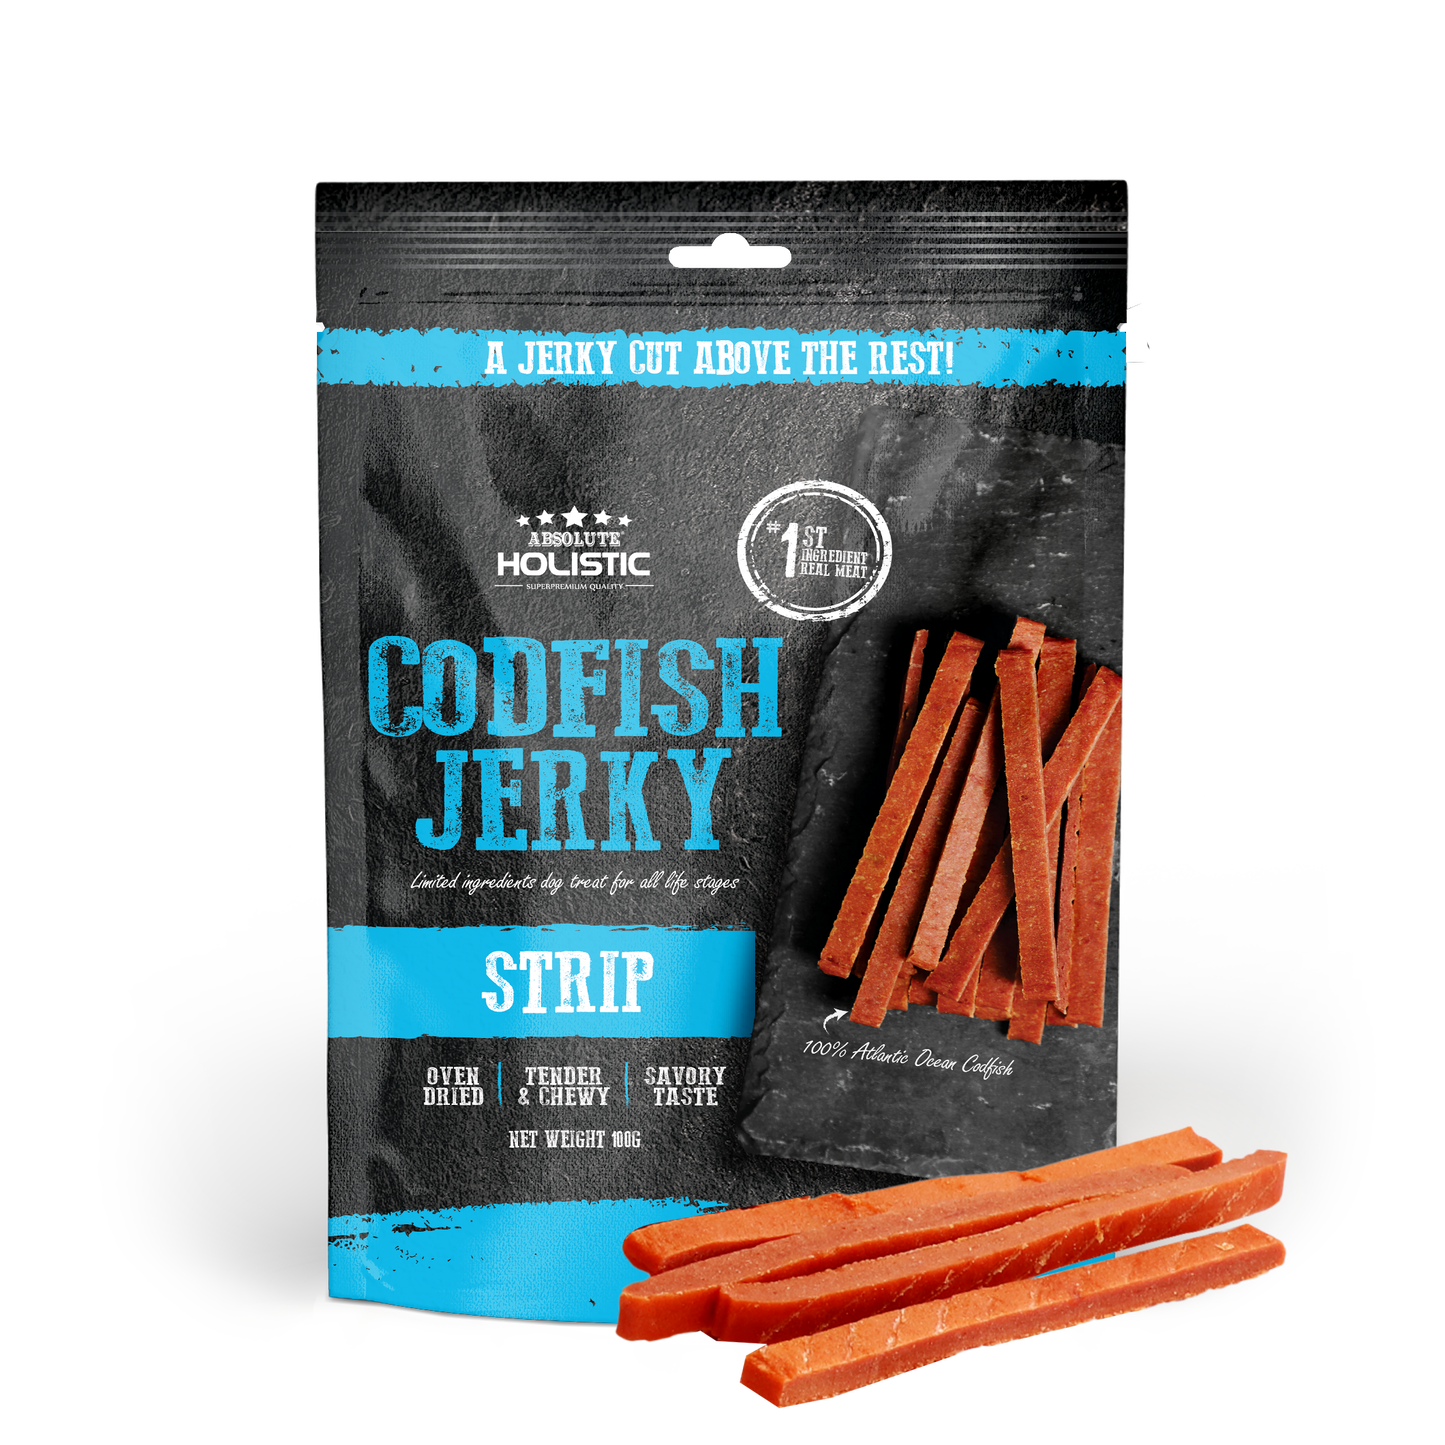 [Up to EXTRA 10% OFF] Absolute Holistic Grain-Free Codfish Loin Strip Jerky Treat for Dogs 100g